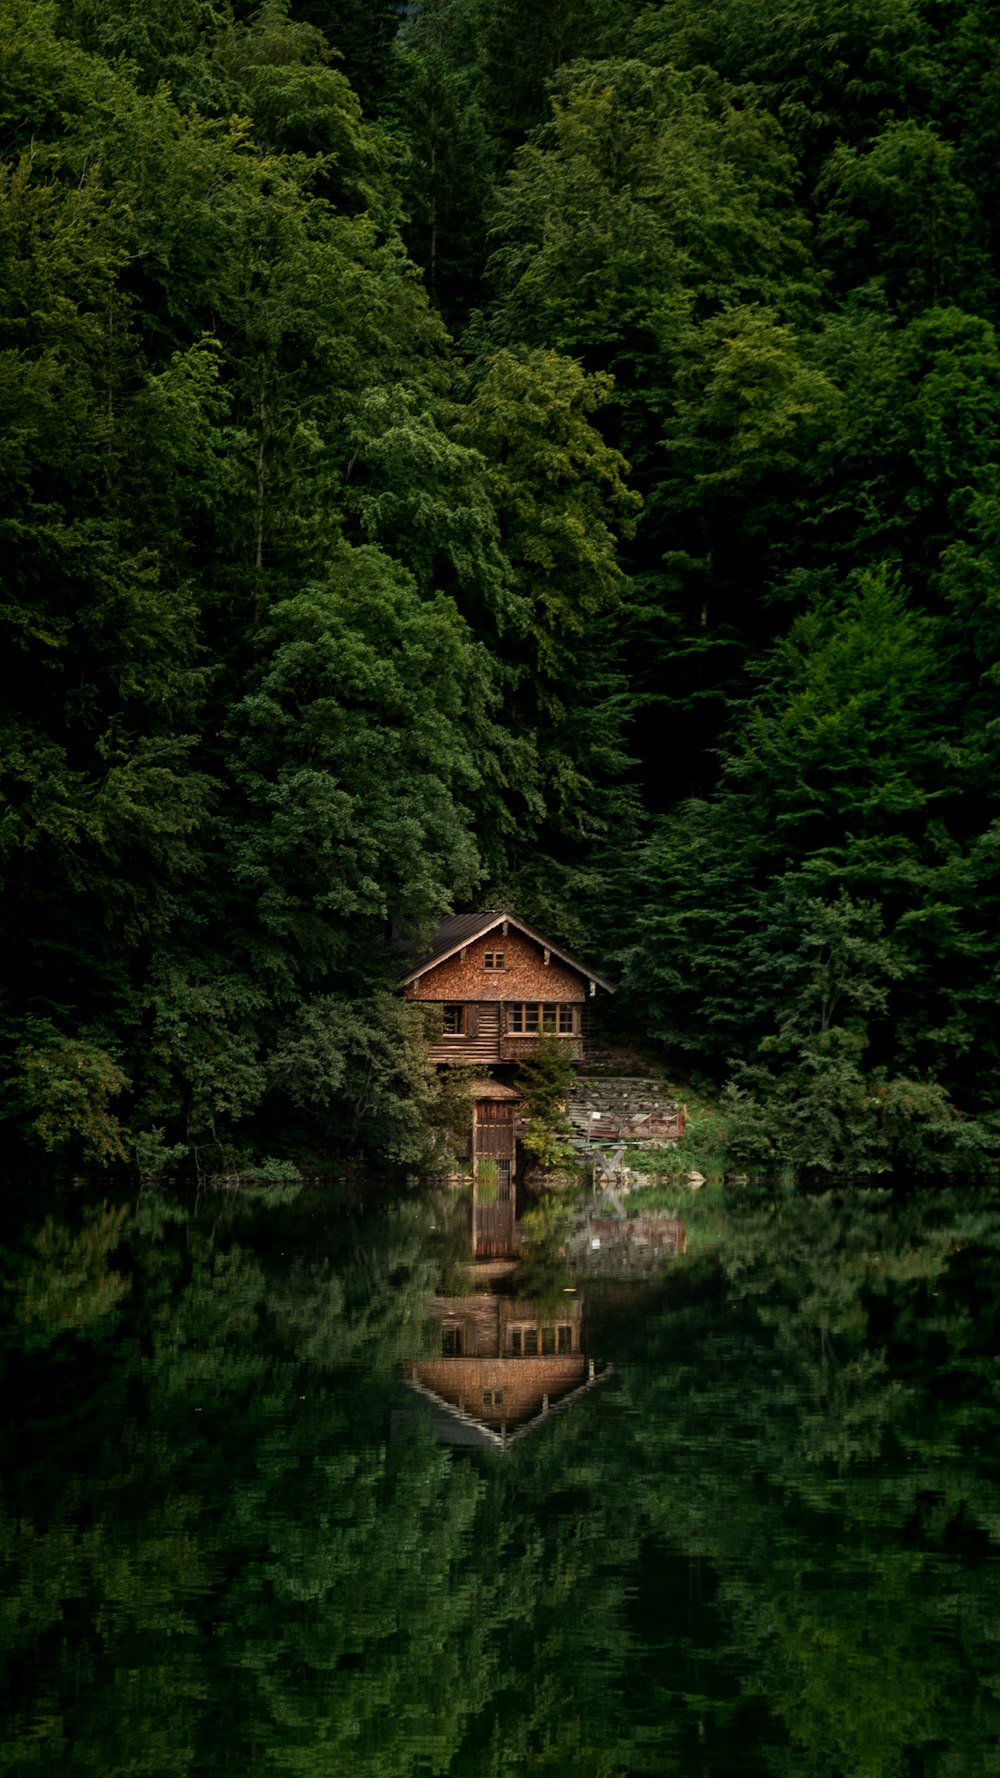 brown wooden house on body of water surrounded by green trees during daytime